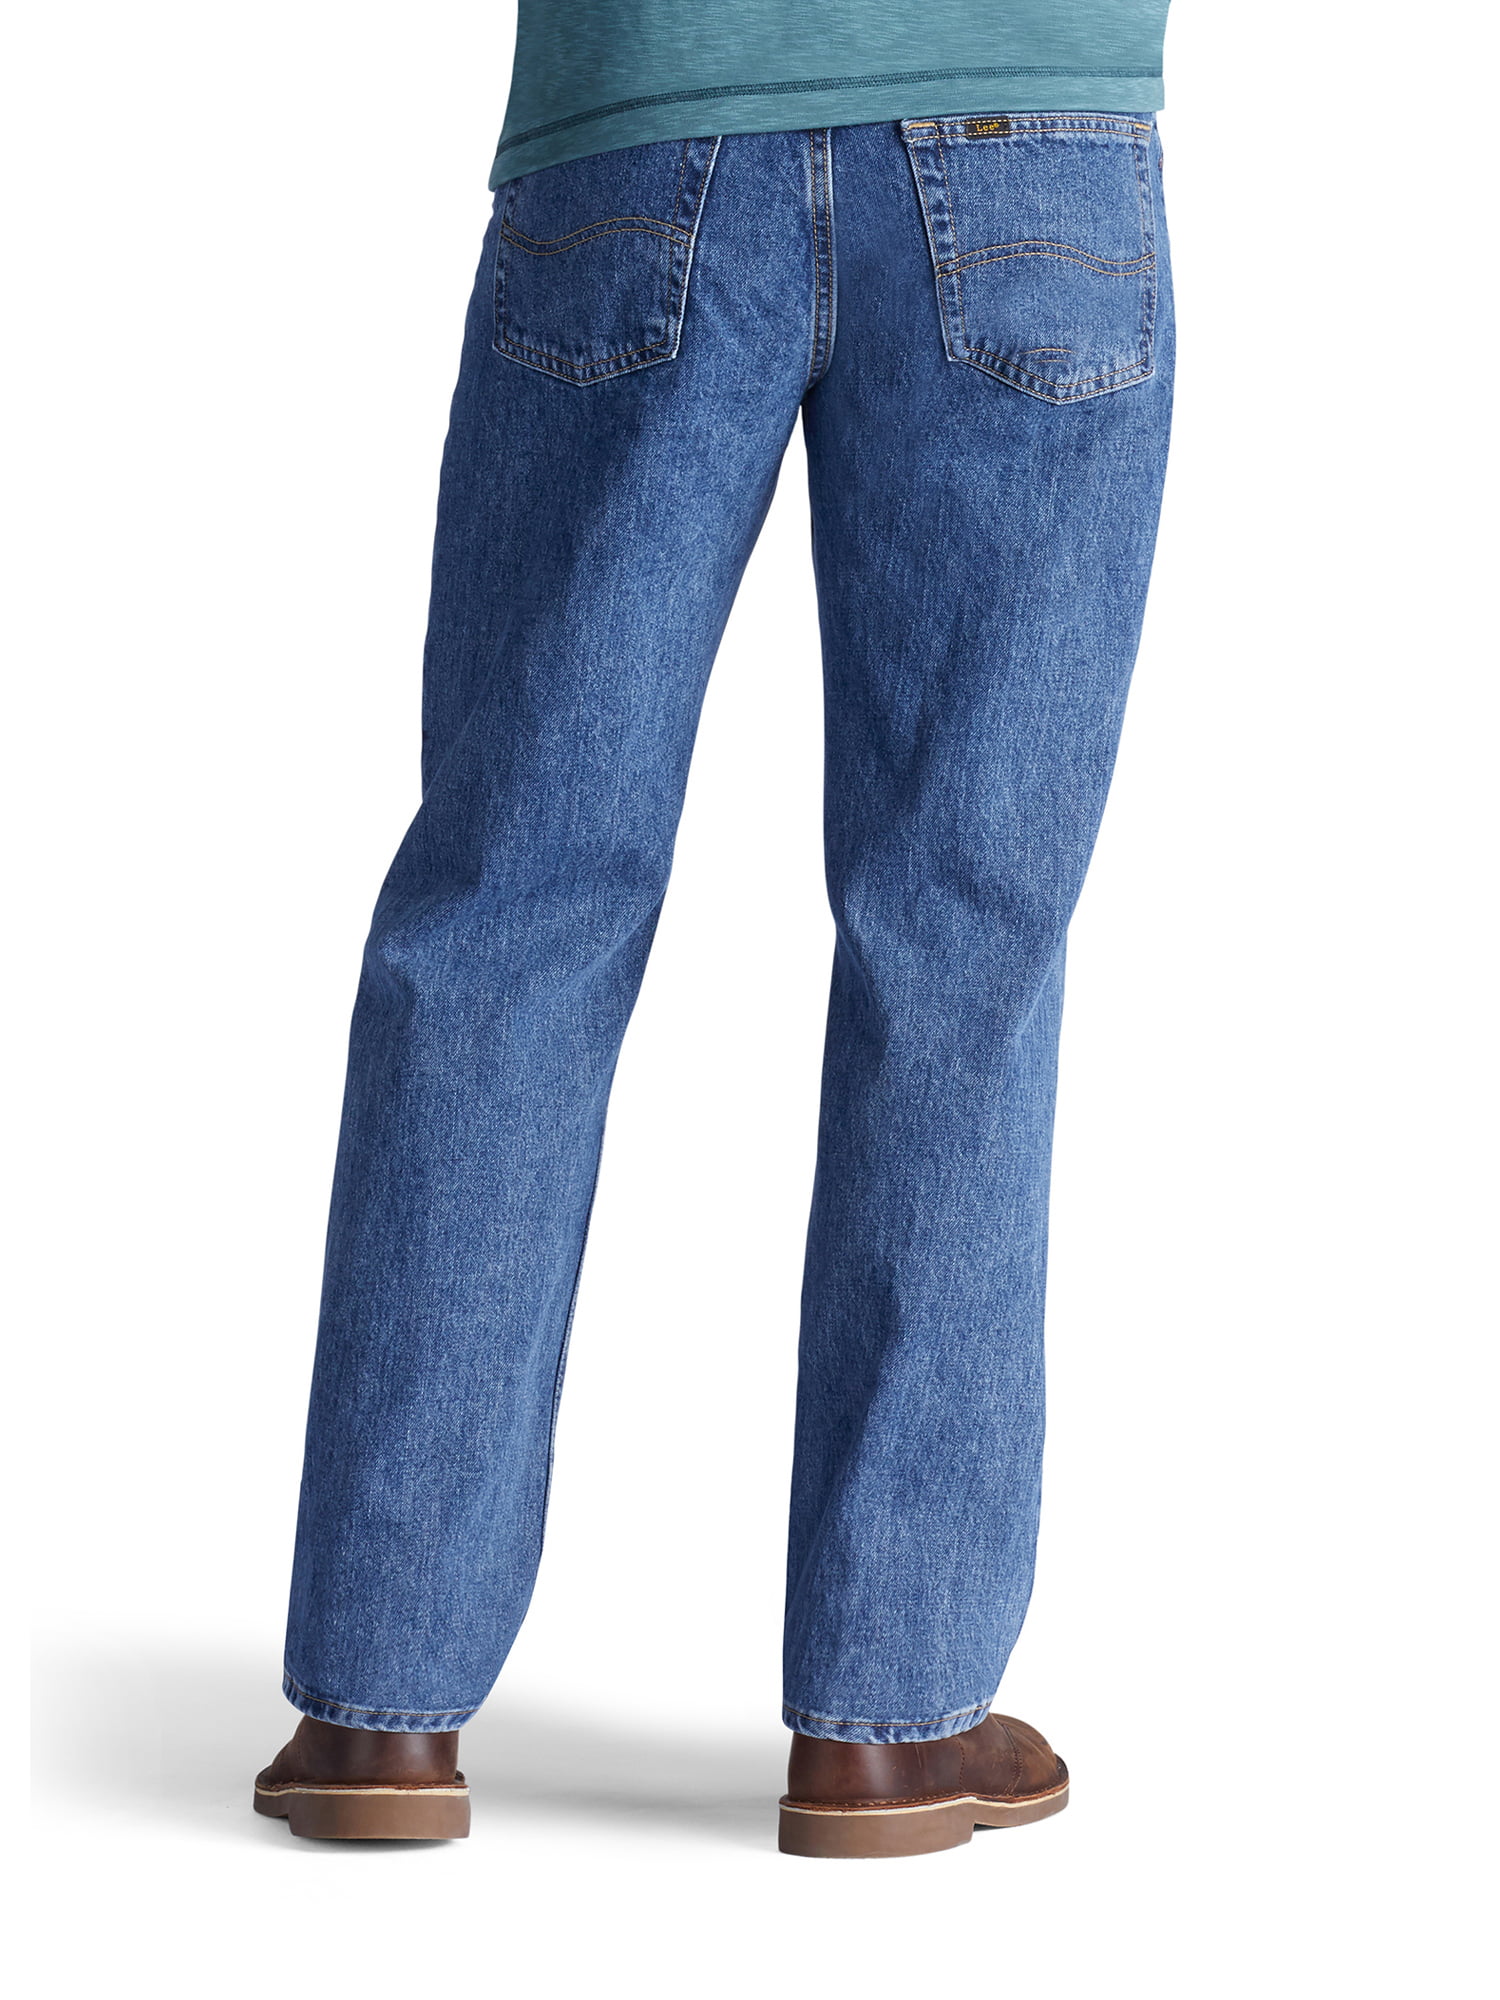 Lee Men's Relaxed Fit Jeans 